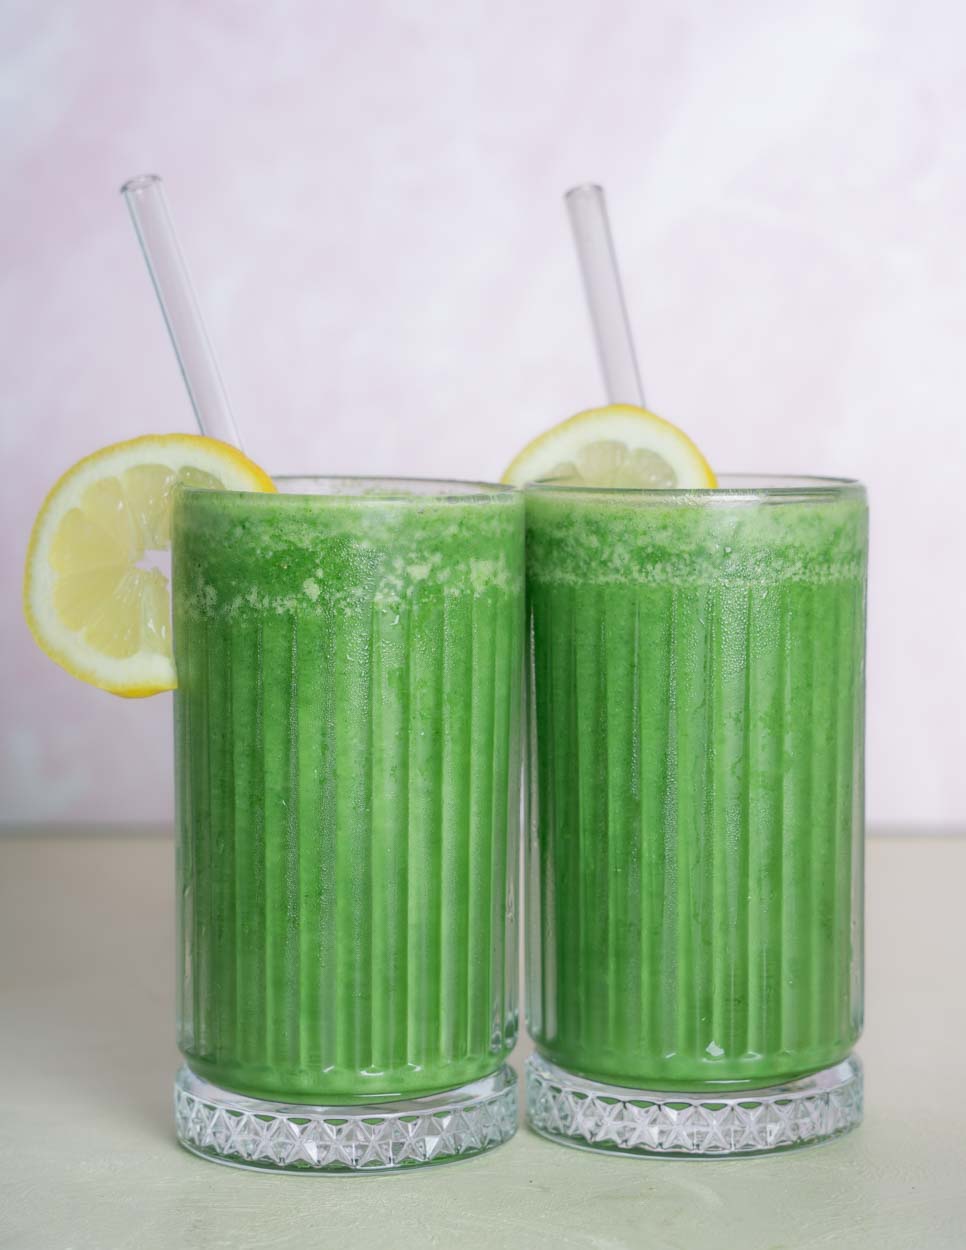 Two glasses of green juice smoothies with a slice of lemon as a garnish. Set in front of a light pink background